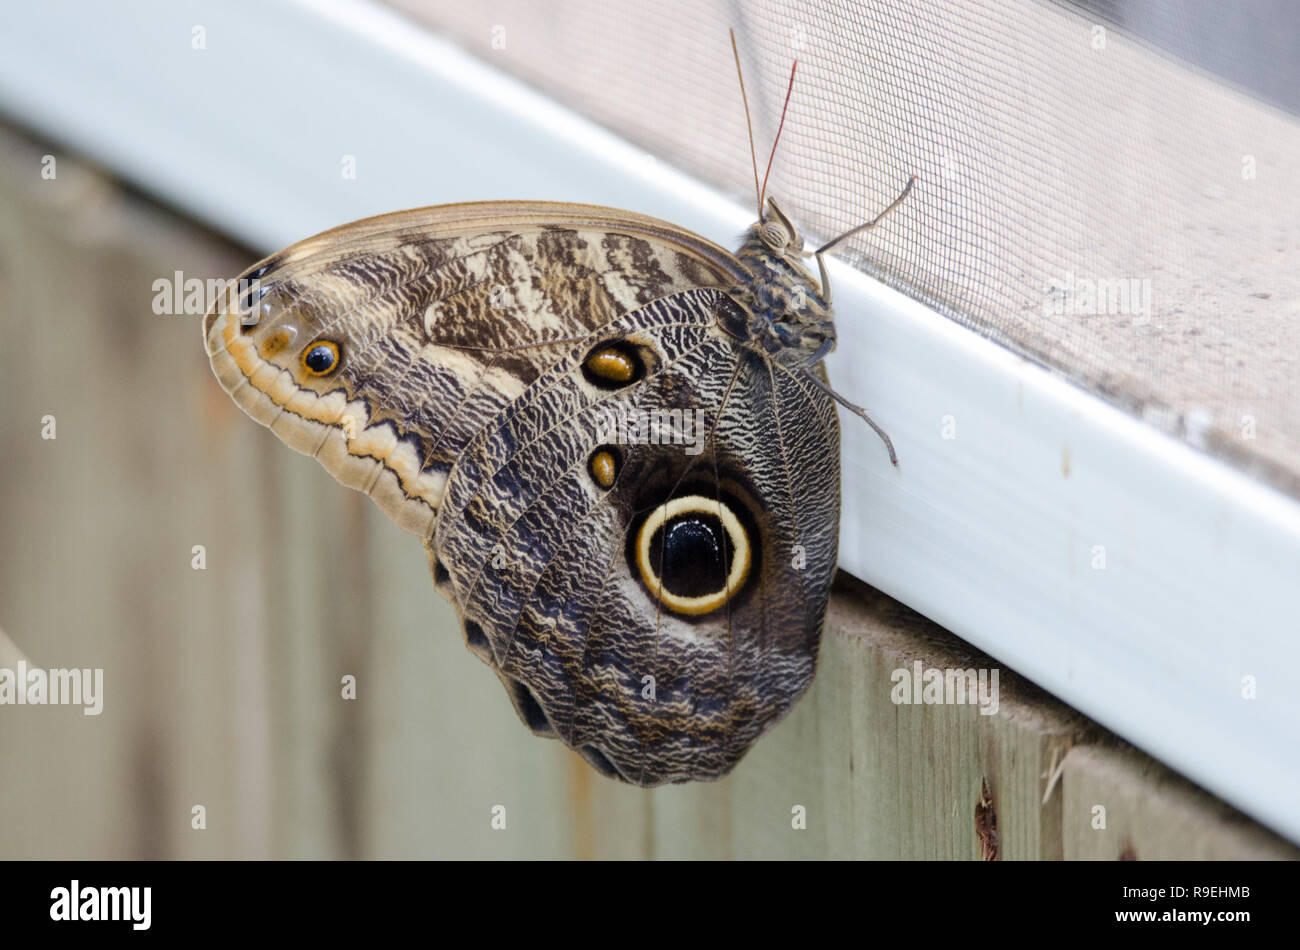 Owl (Caligo memnon) butterfly with wings closed on a window frame. Stock Photo